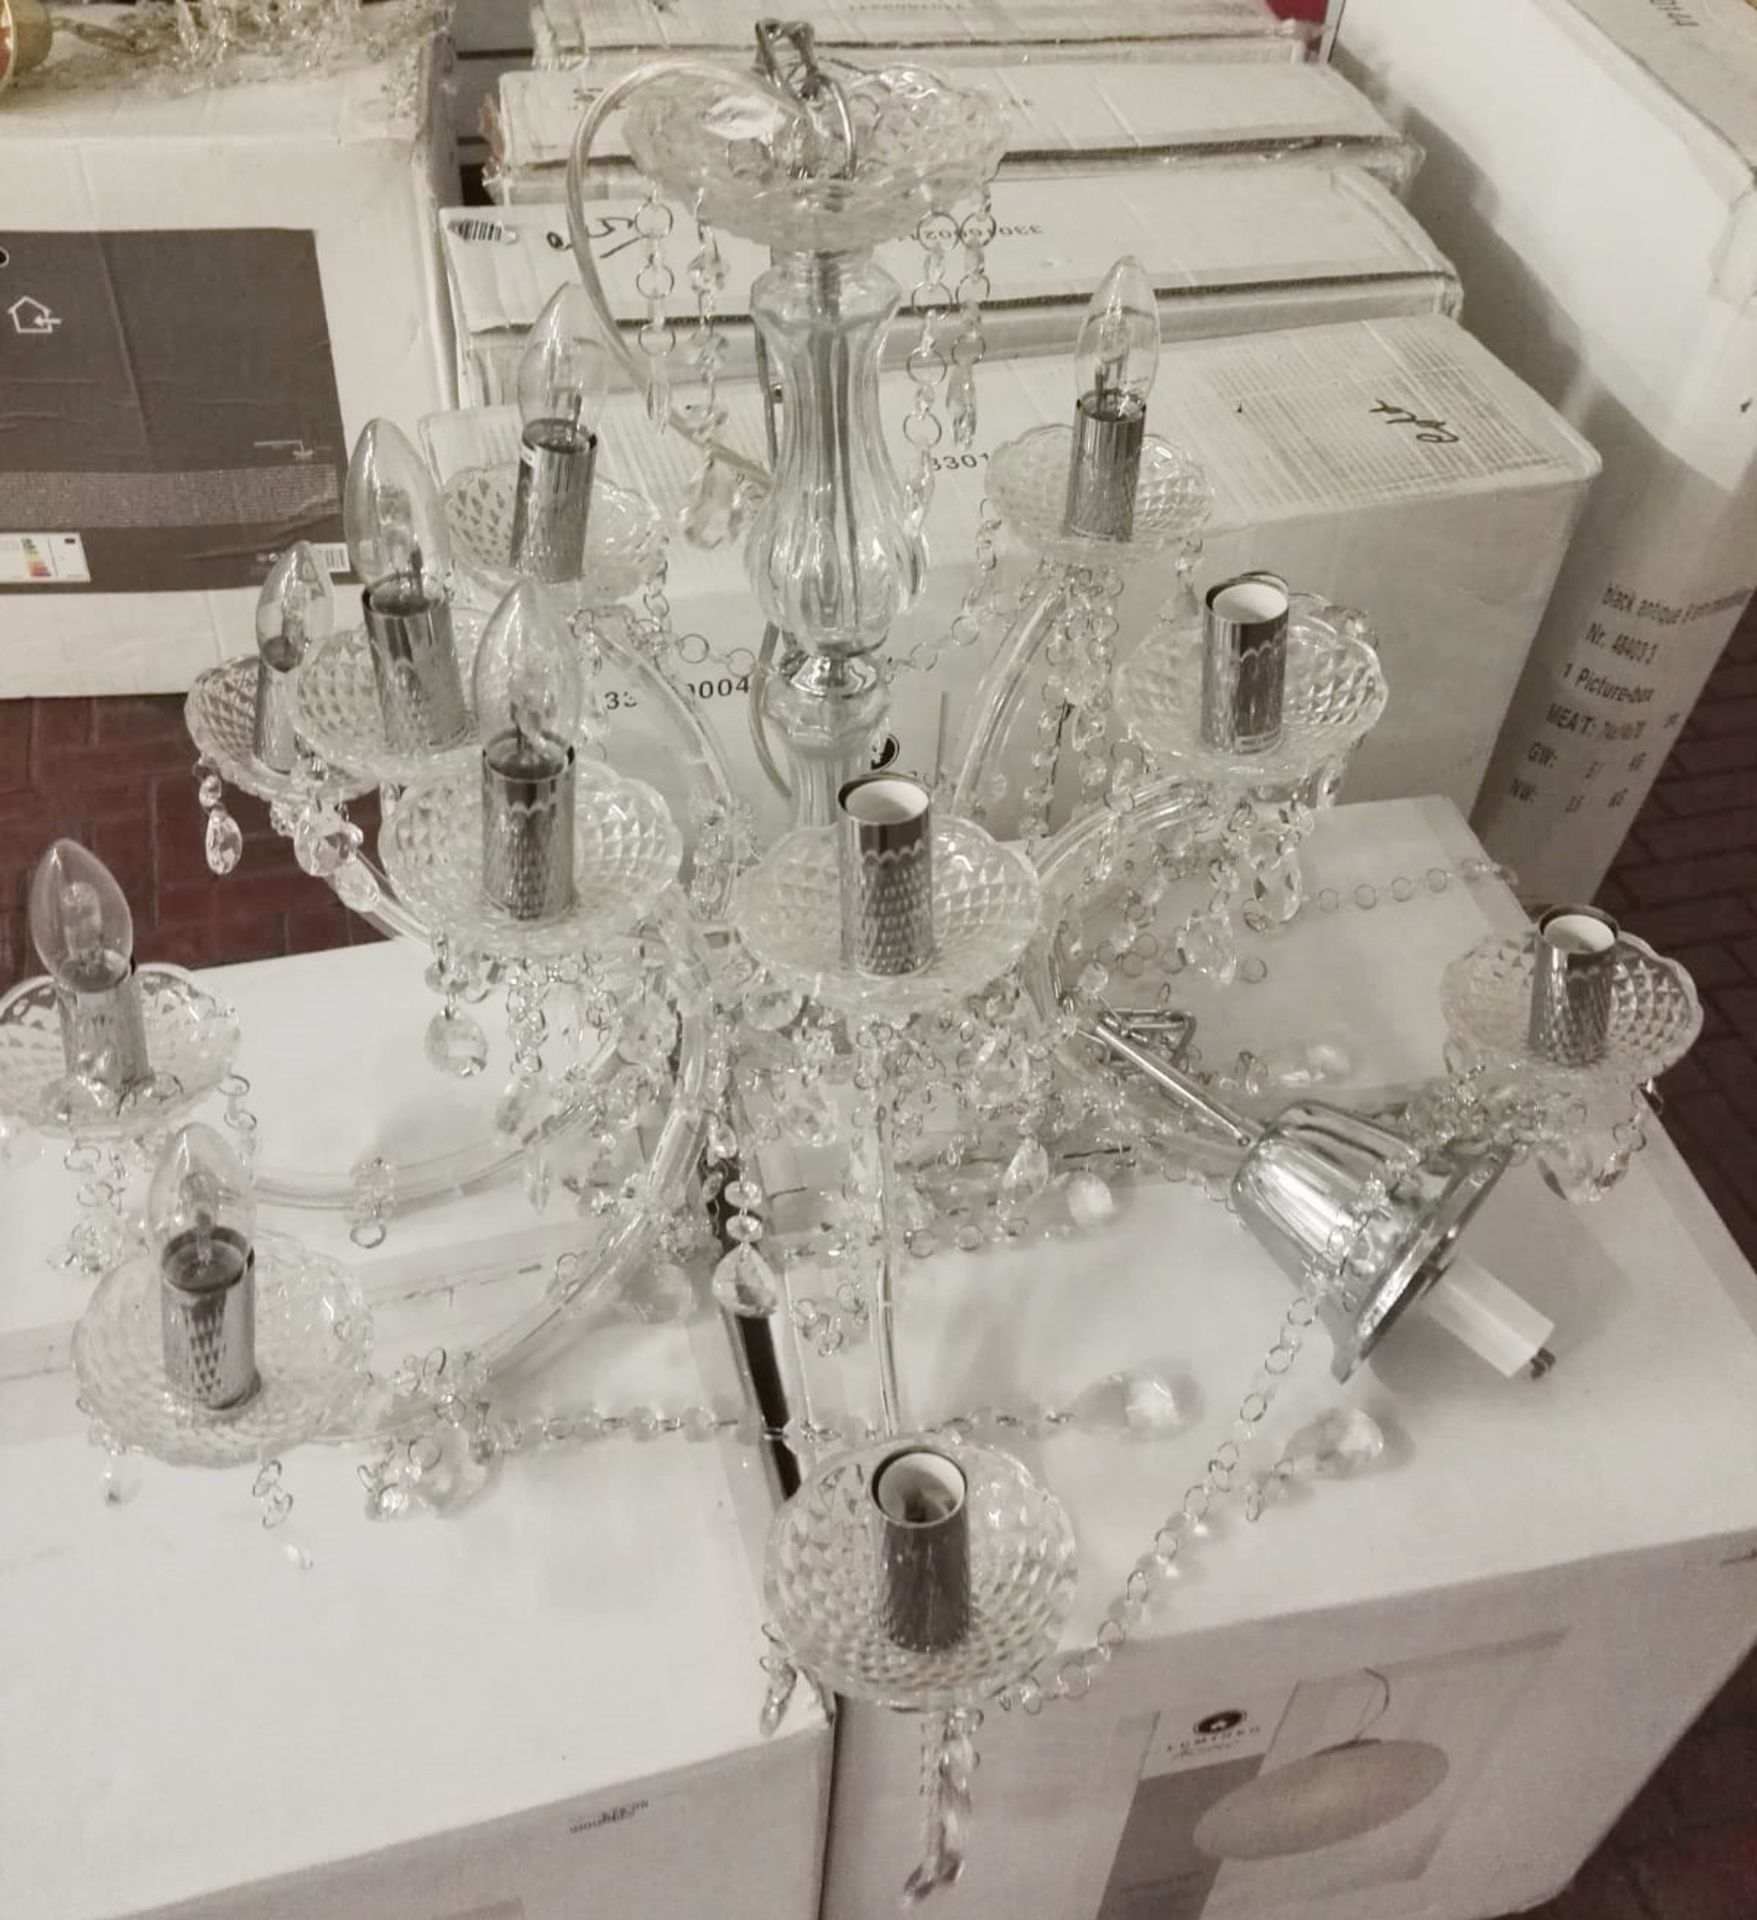 22 x Assorted Items Of Lighting Including Chandeliers, Pendants And Other Contemporary Lights - Image 2 of 10